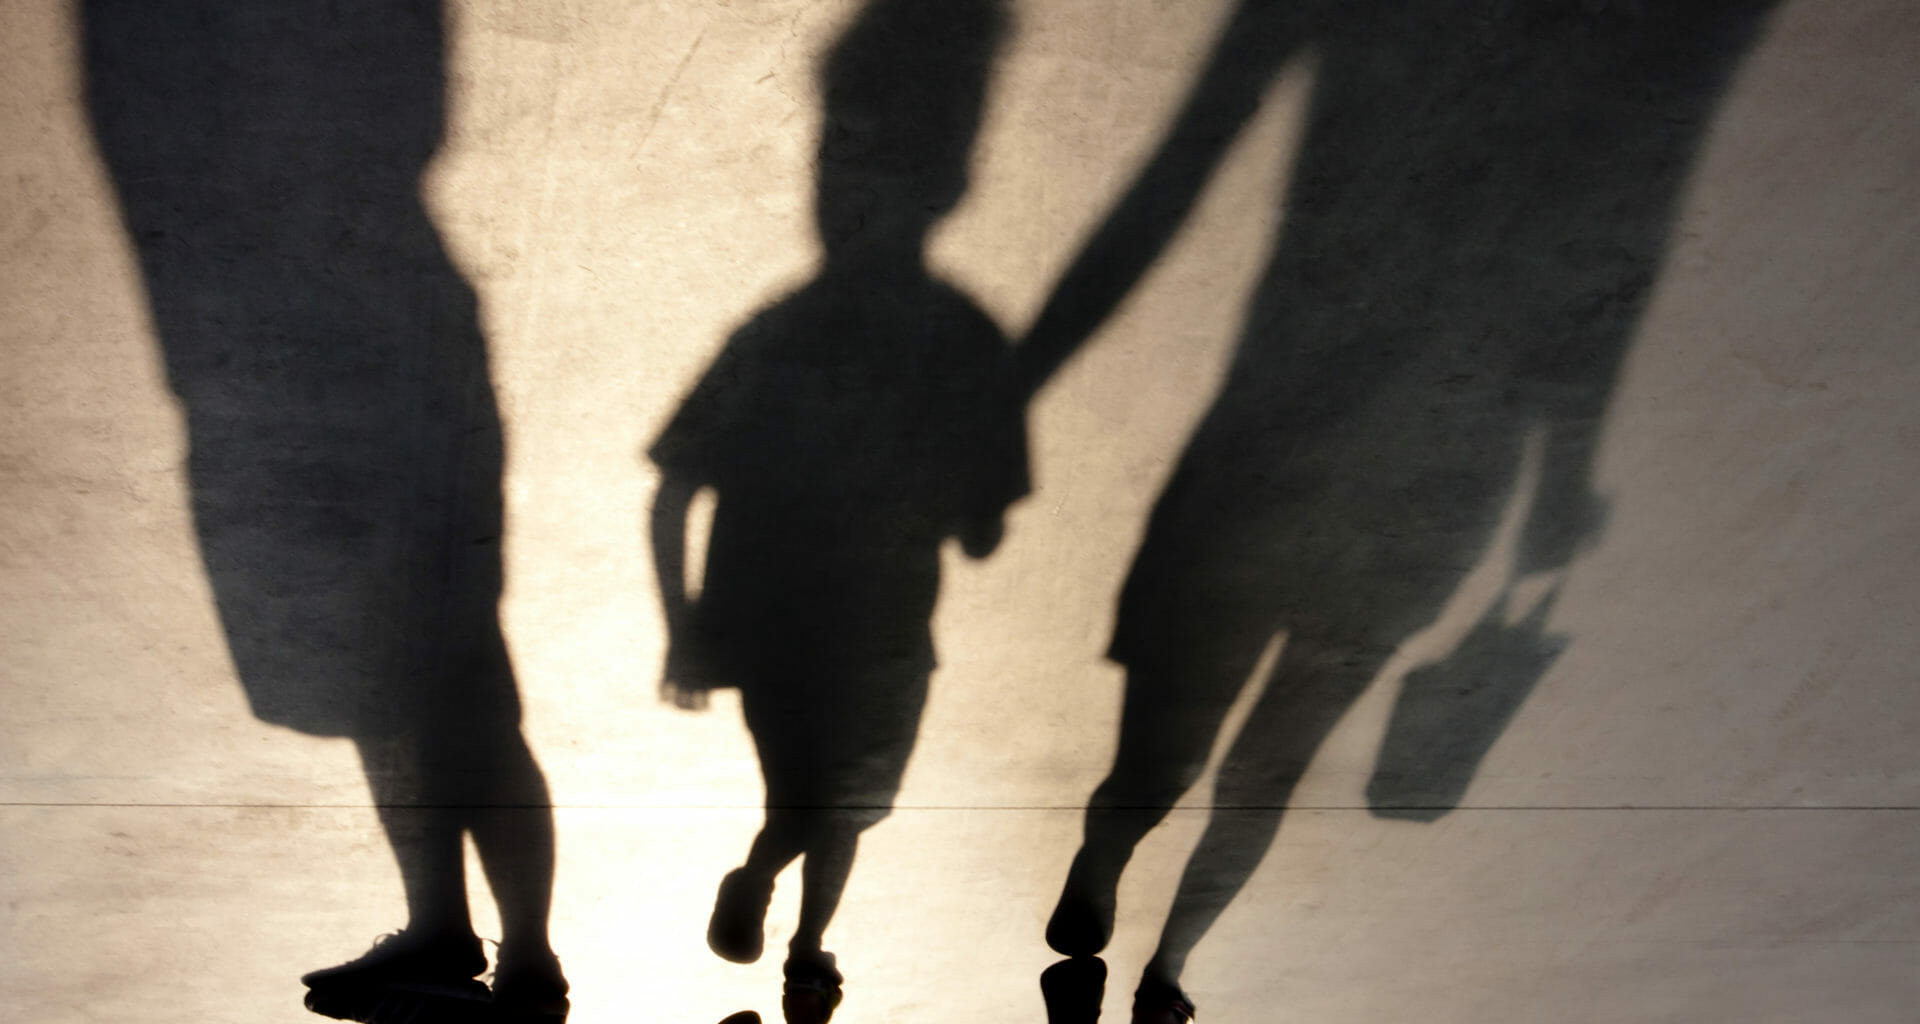 Missing trafficked children prompts claims of "child protection crisis" 3